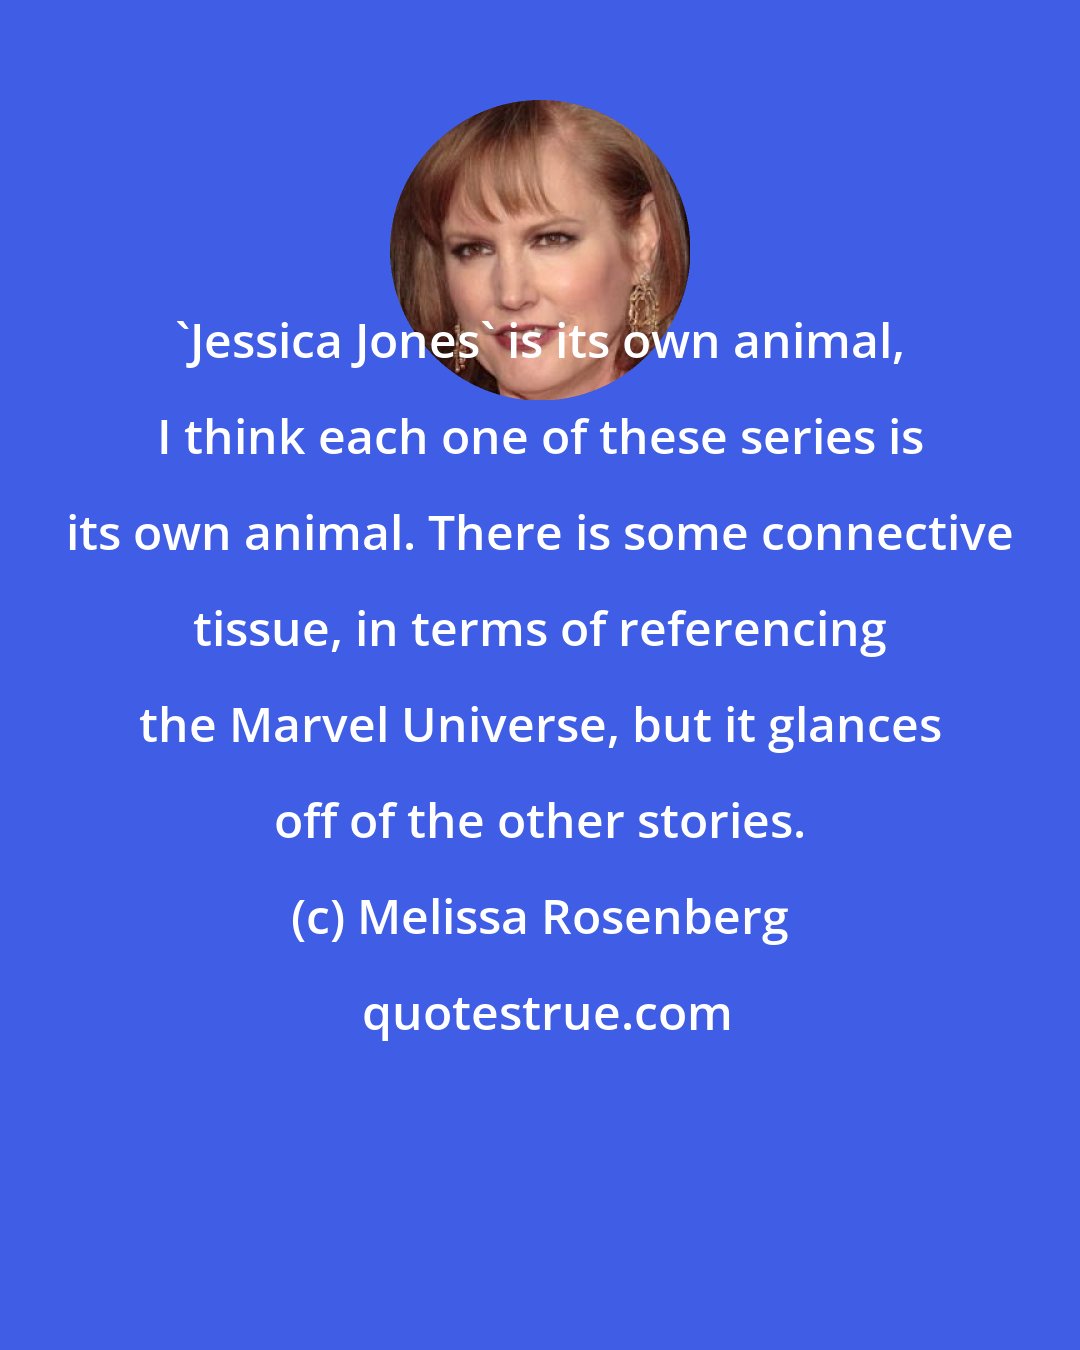 Melissa Rosenberg: 'Jessica Jones' is its own animal, I think each one of these series is its own animal. There is some connective tissue, in terms of referencing the Marvel Universe, but it glances off of the other stories.